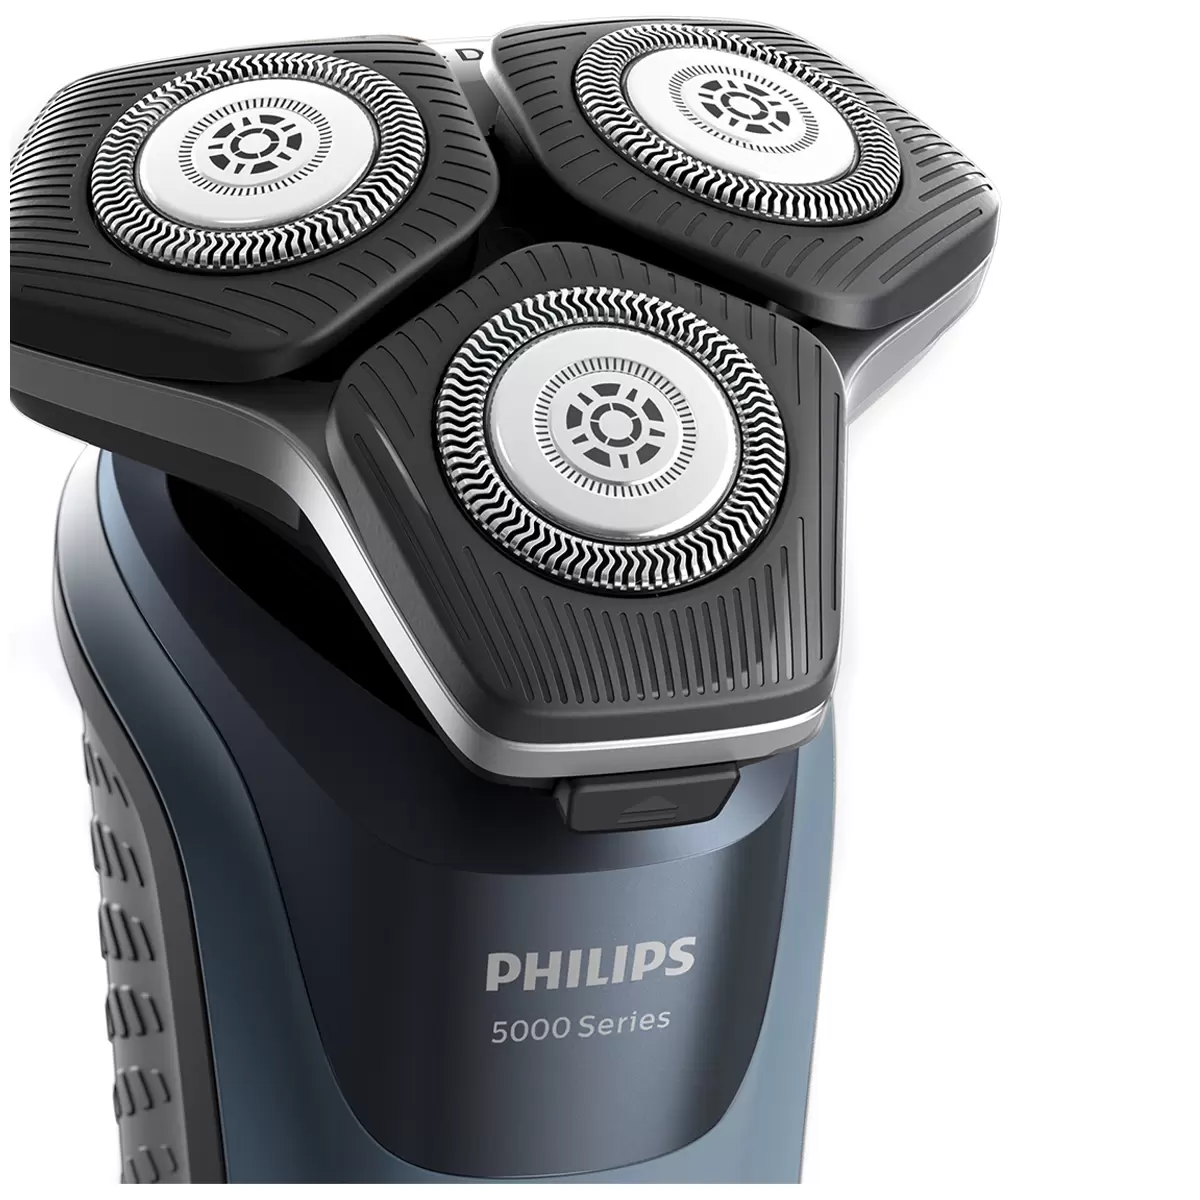 Philips Shaver Series 5000 And Body Shaver Bundle Pack 6003631